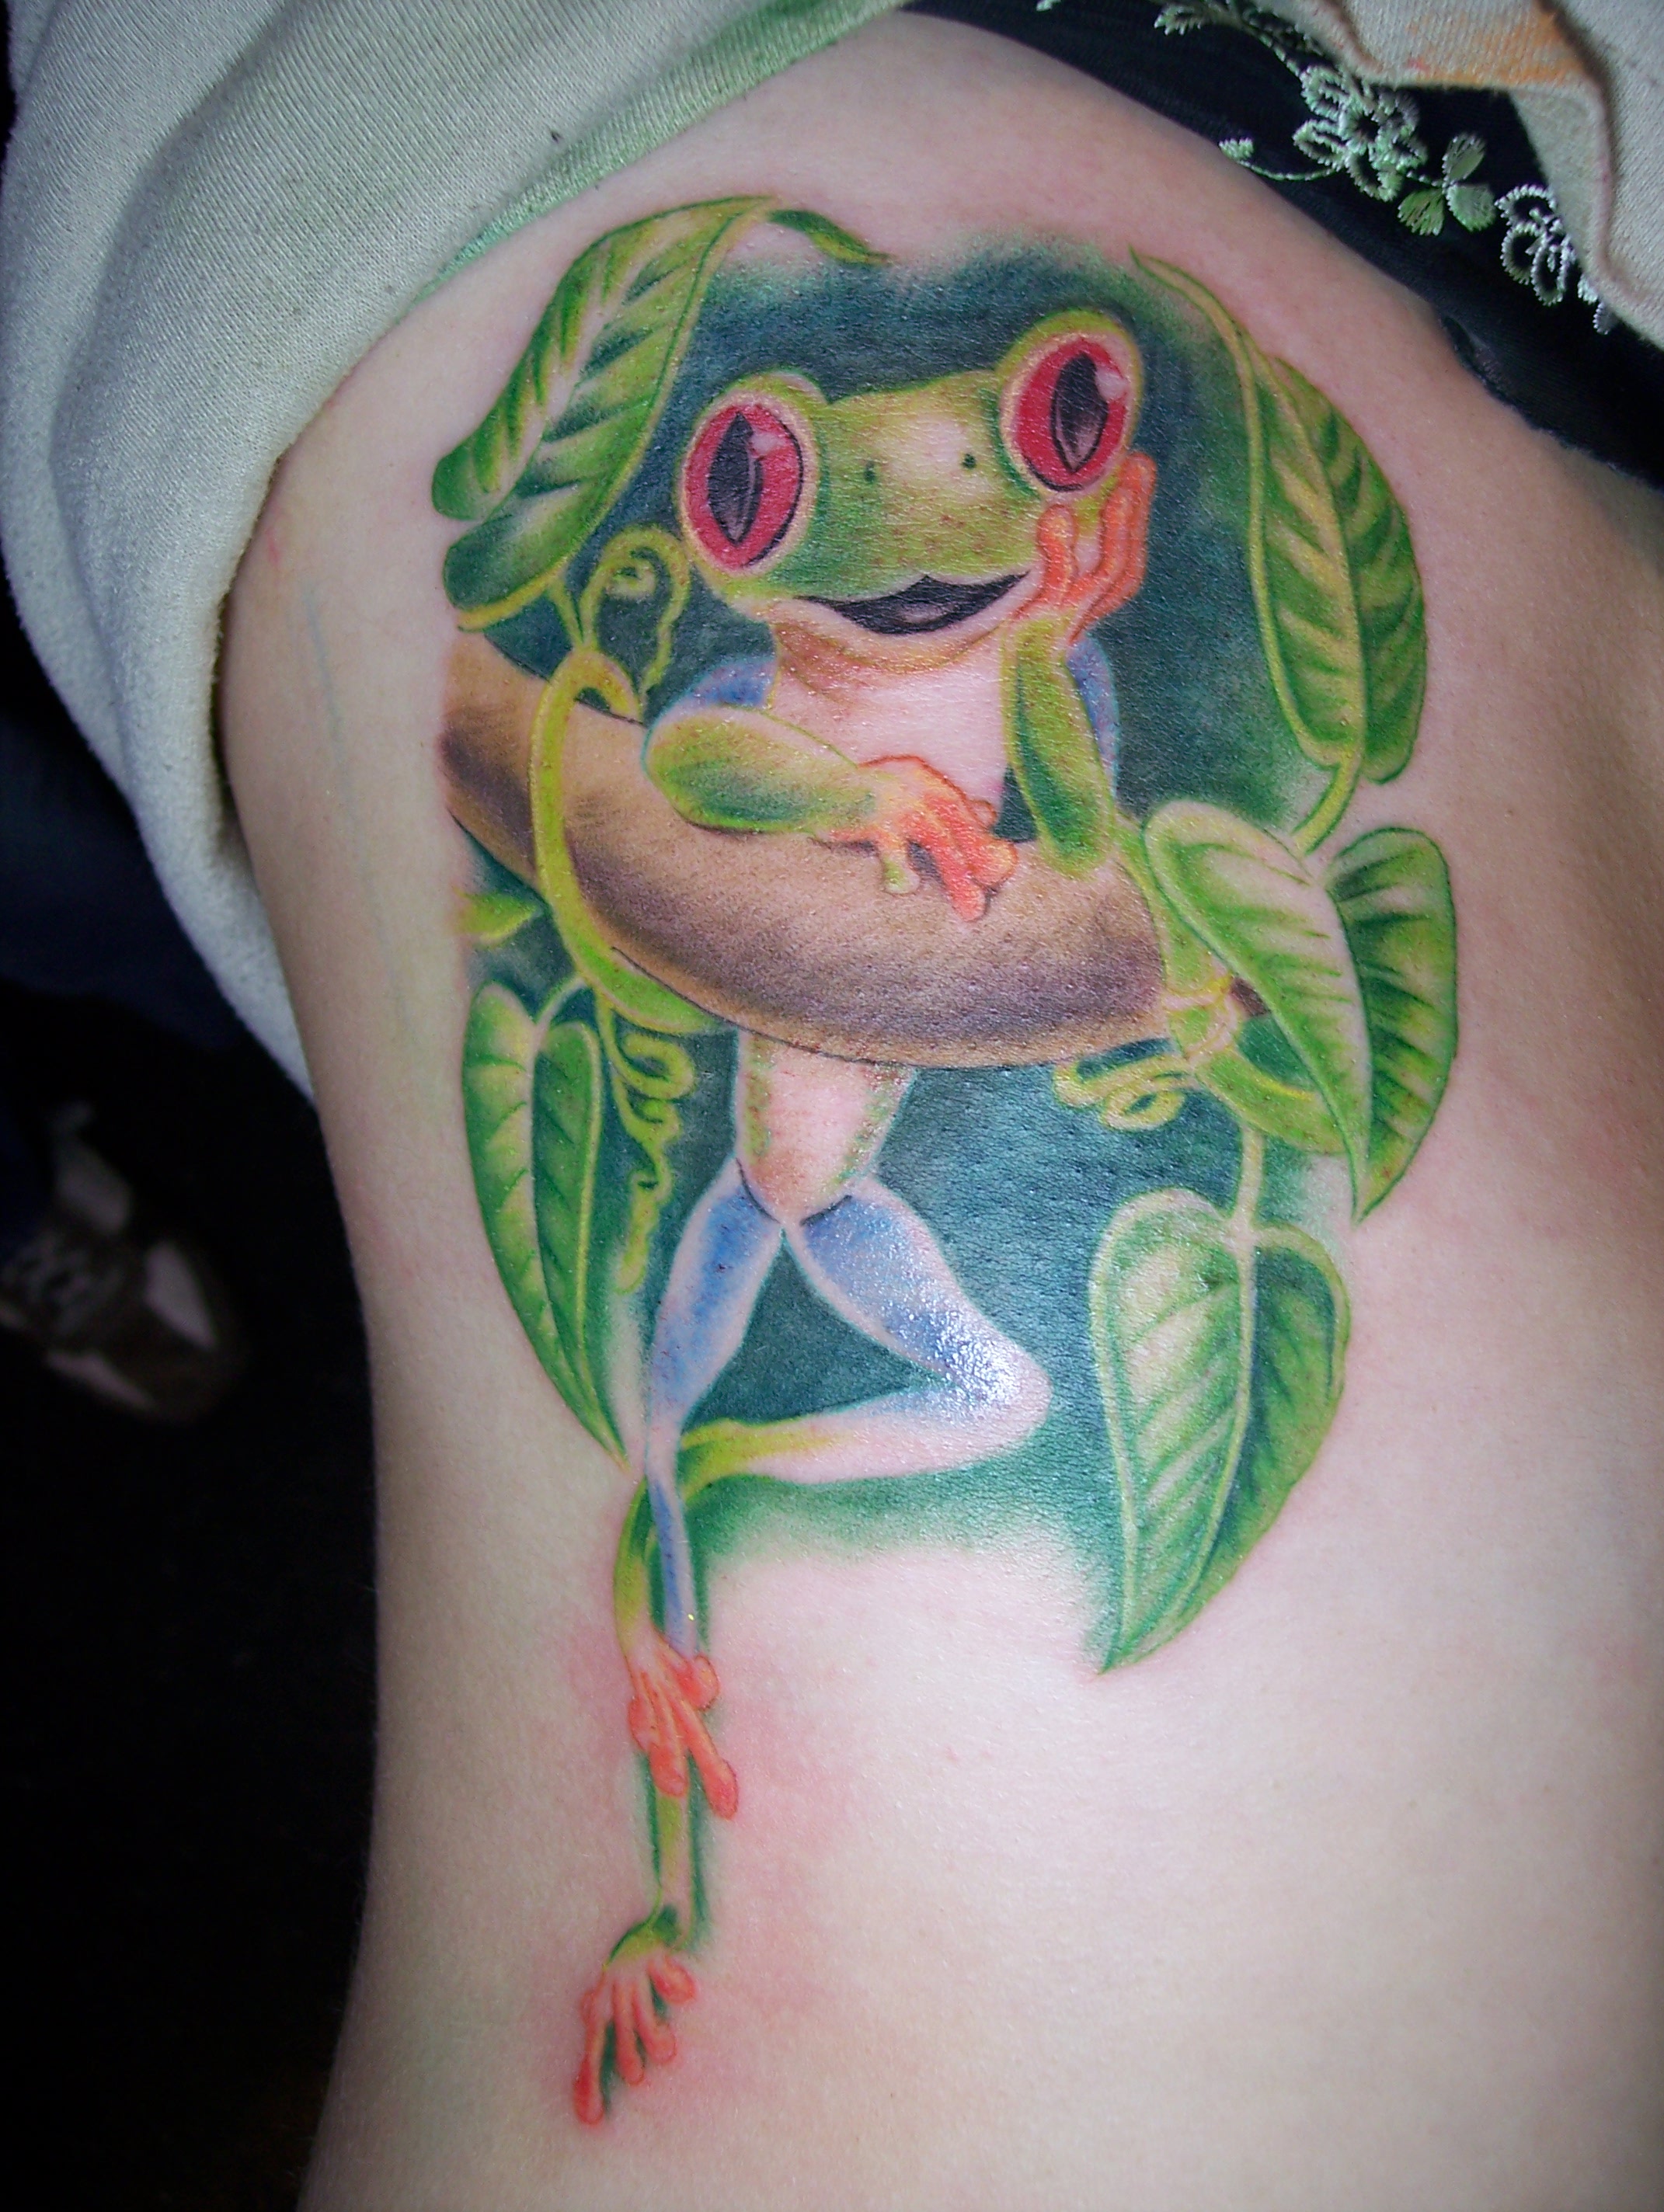 Frog Tattoos Designs, Ideas and Meaning | Tattoos For You